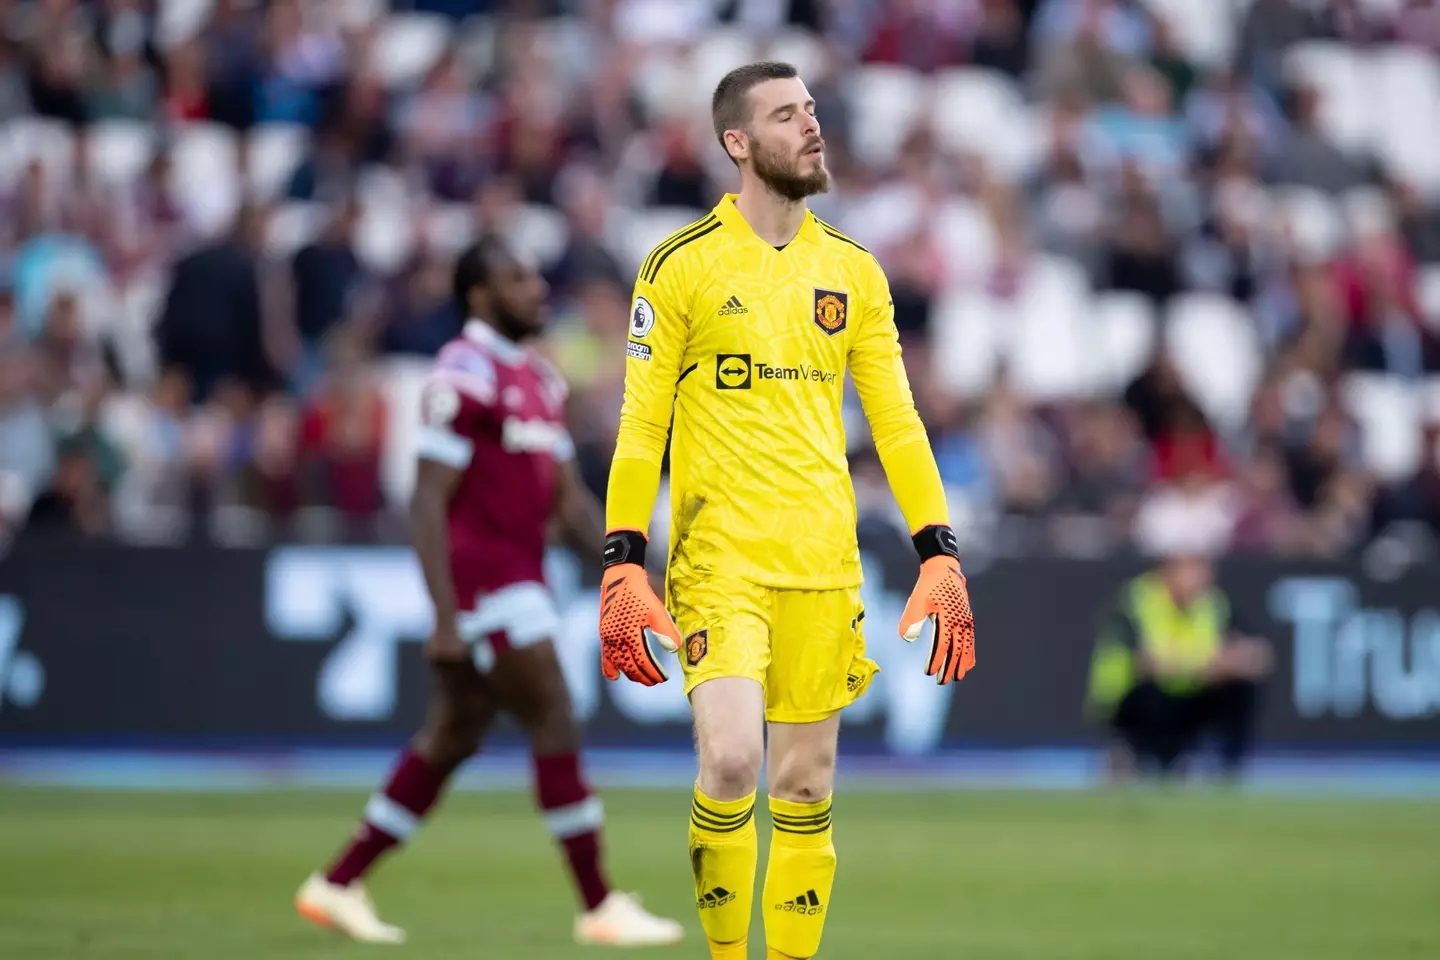 It was a poor day for De Gea. Image: Alamy